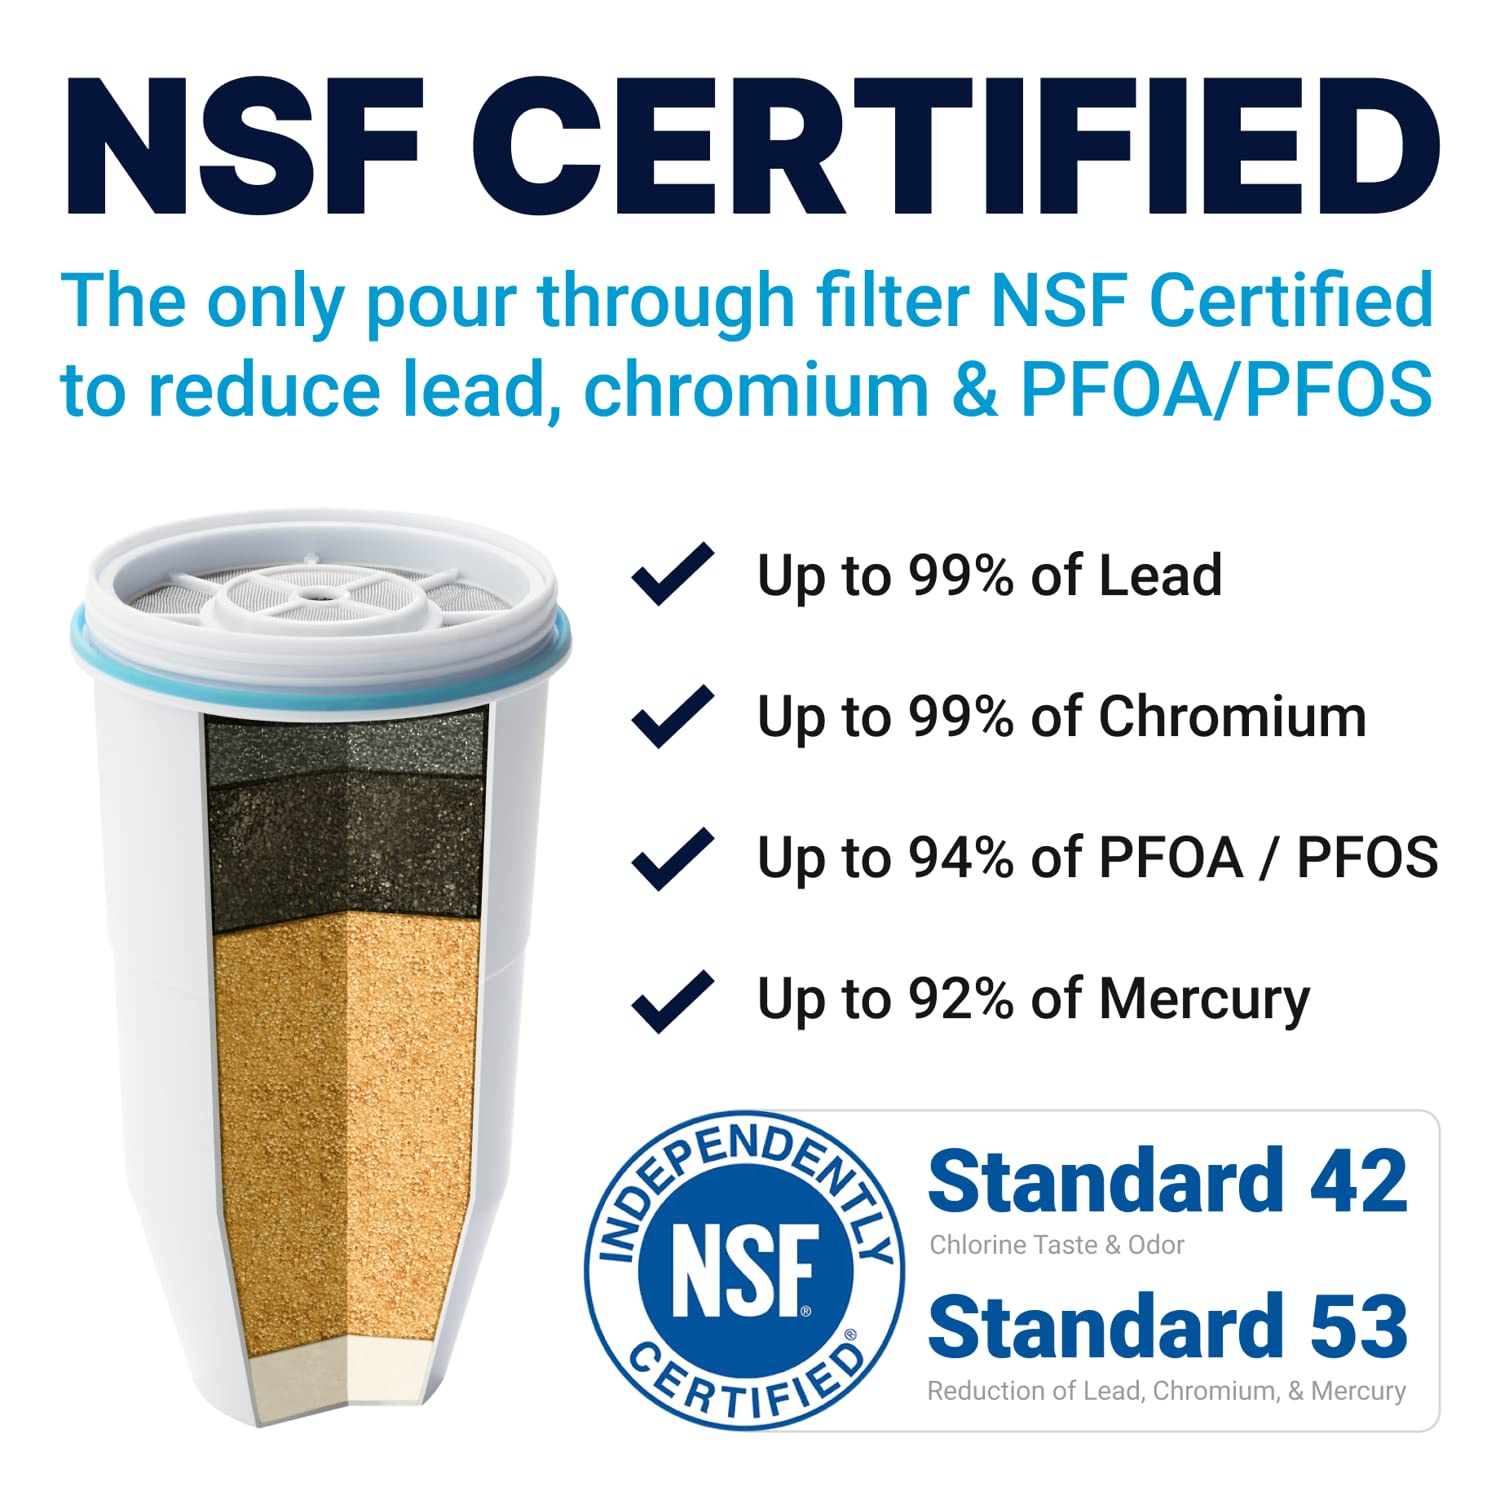 ZeroWater Official 5-Stage Water Filter for Replacement, NSF Certified to Reduce Lead, Other Heavy Metals and PFOA/PFOS, 4-Pack & ZD-018 ZD018, 23 Cup Water Filter Pitcher with Water Quality Meter